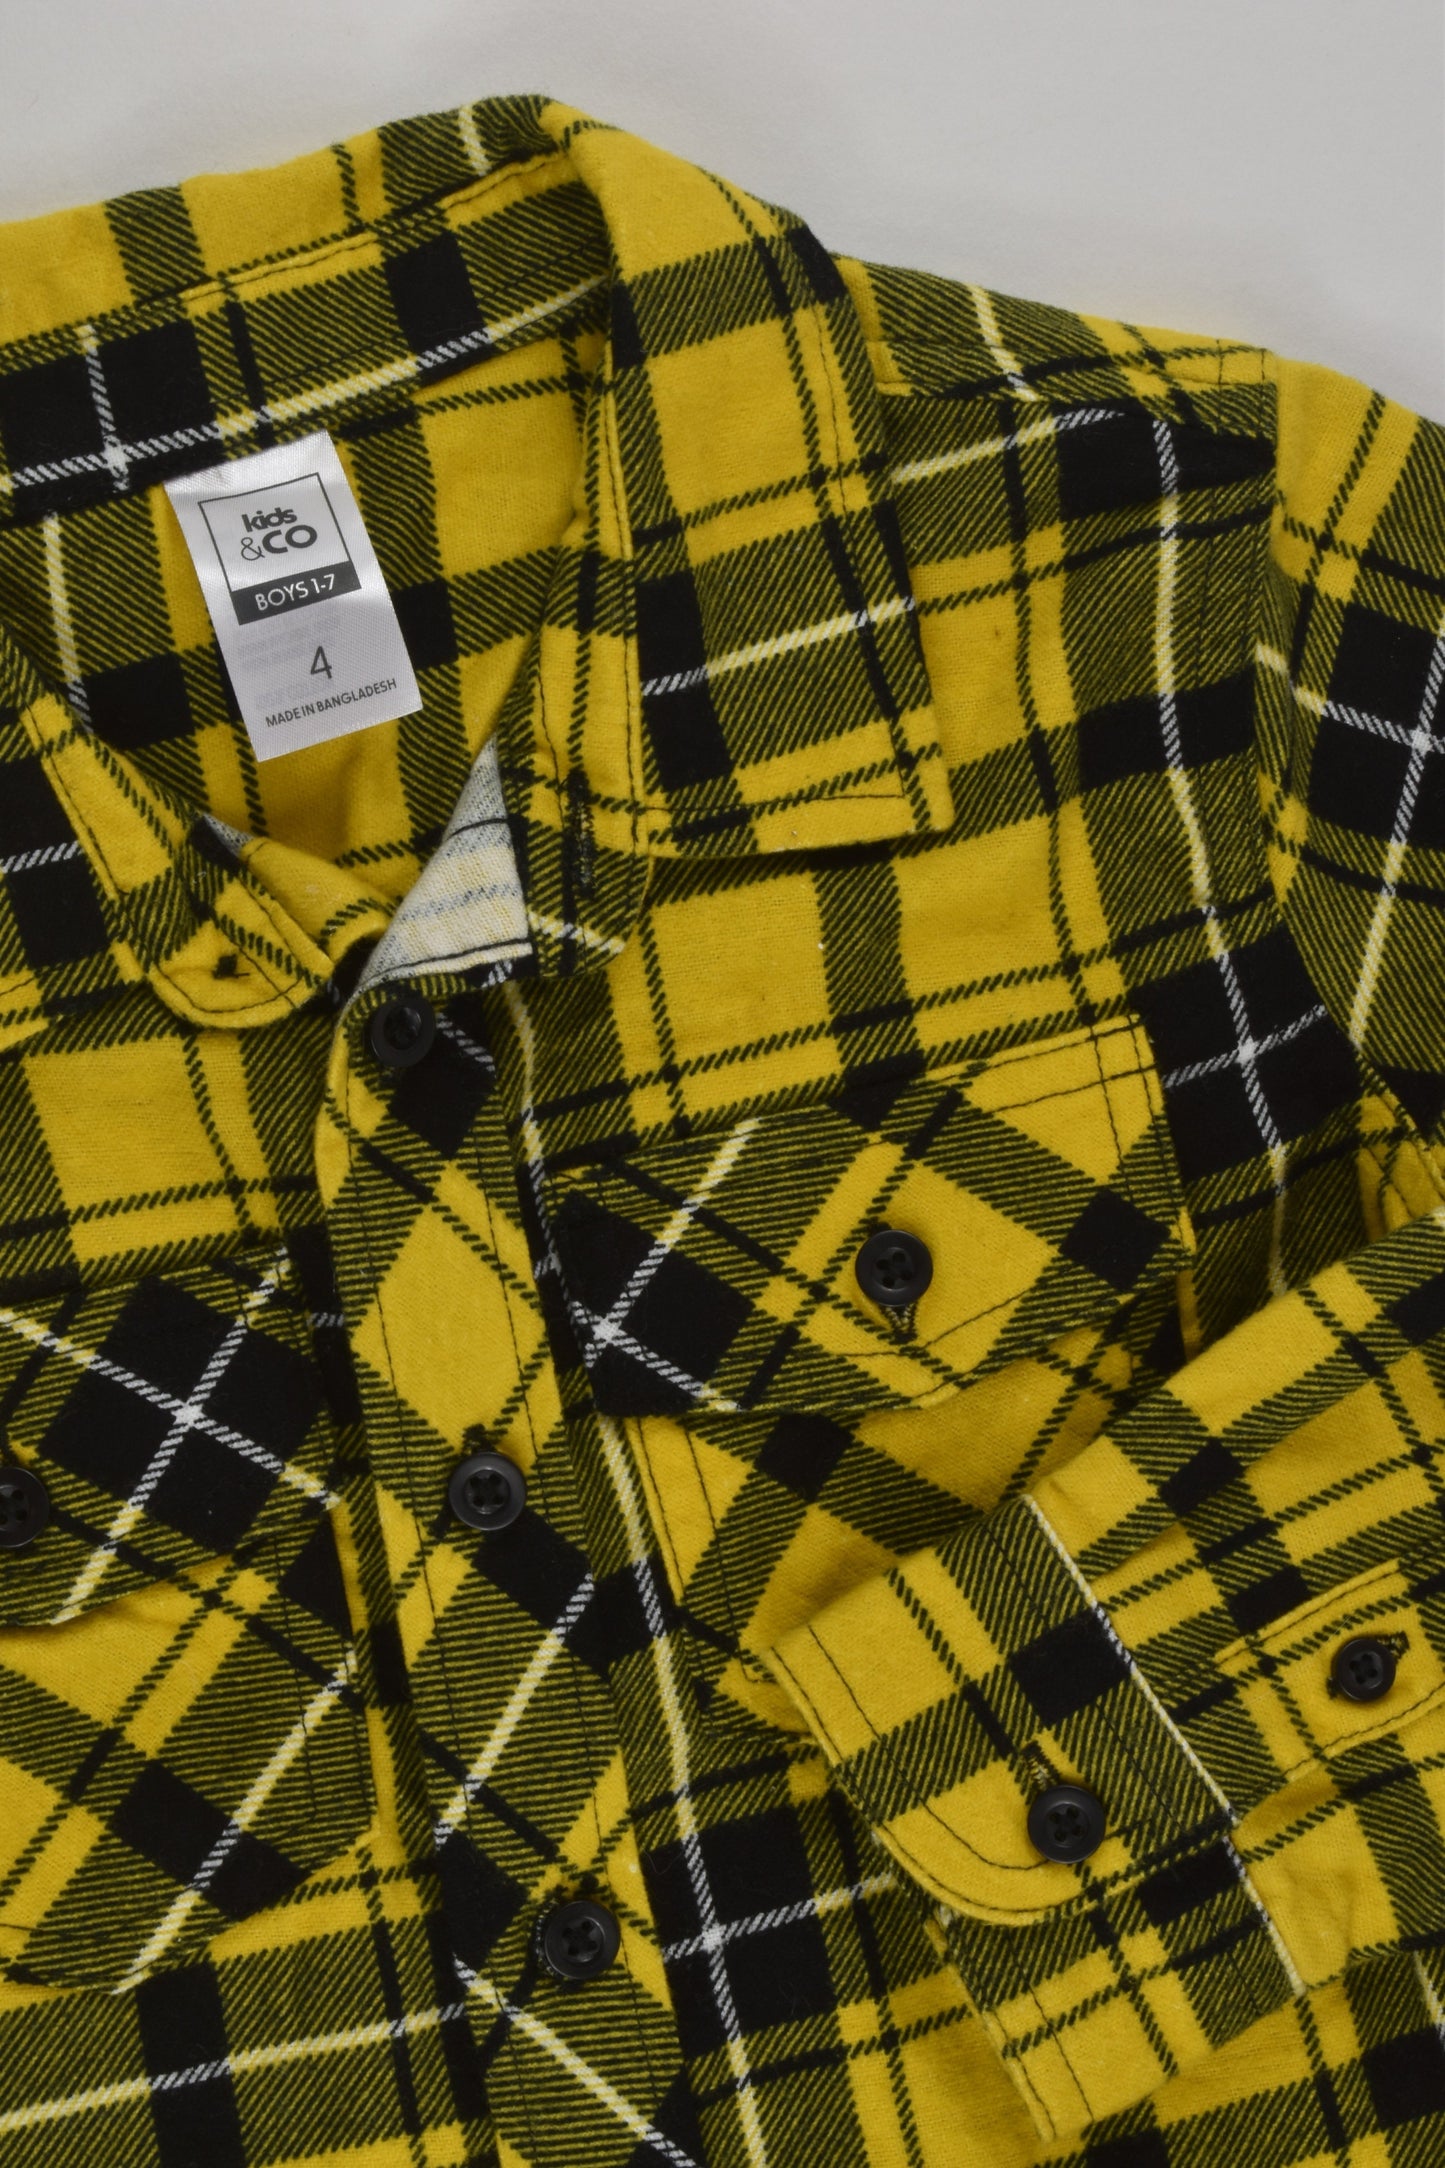 Kids & Co Size 4 Checked Casual Winter Shirt